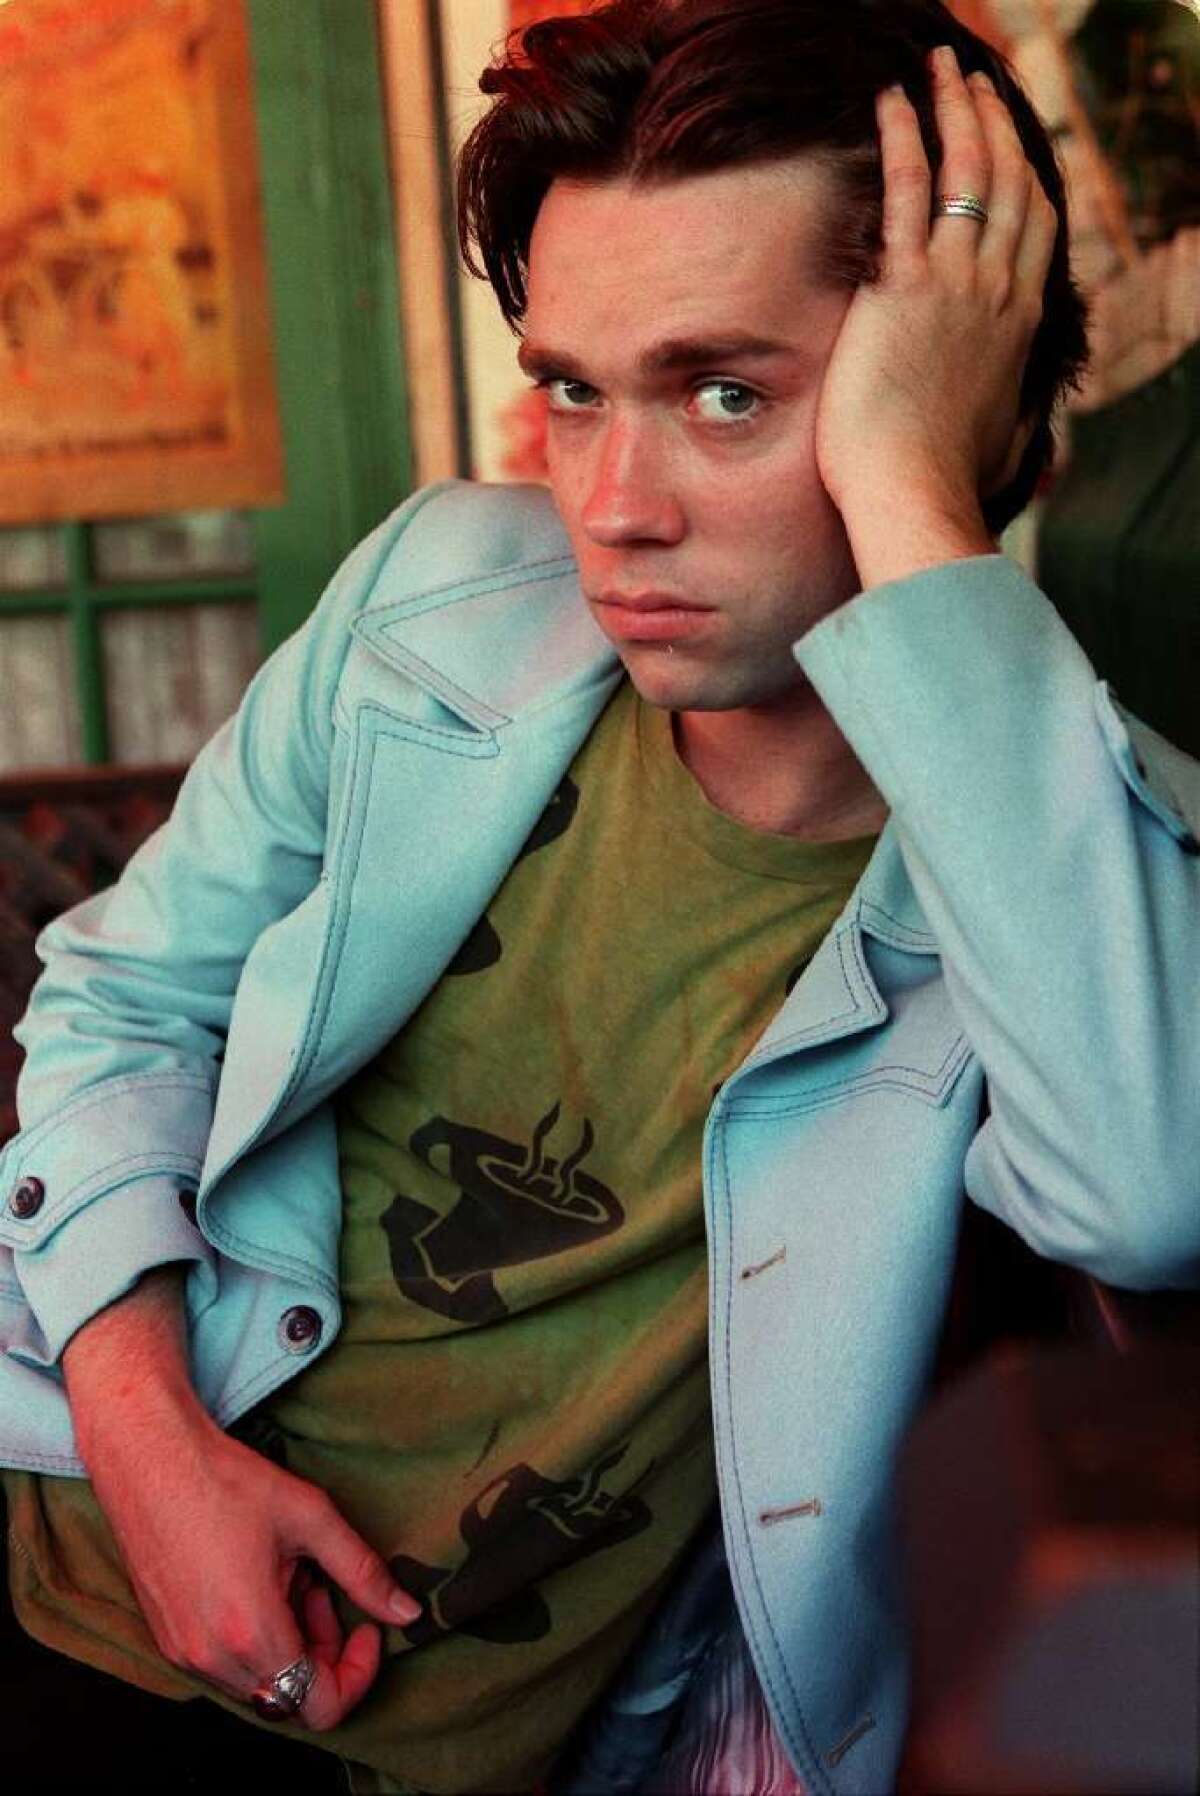 Rufus Wainwright photograhed in West Hollywood in July 1998, around the time he released his debut.